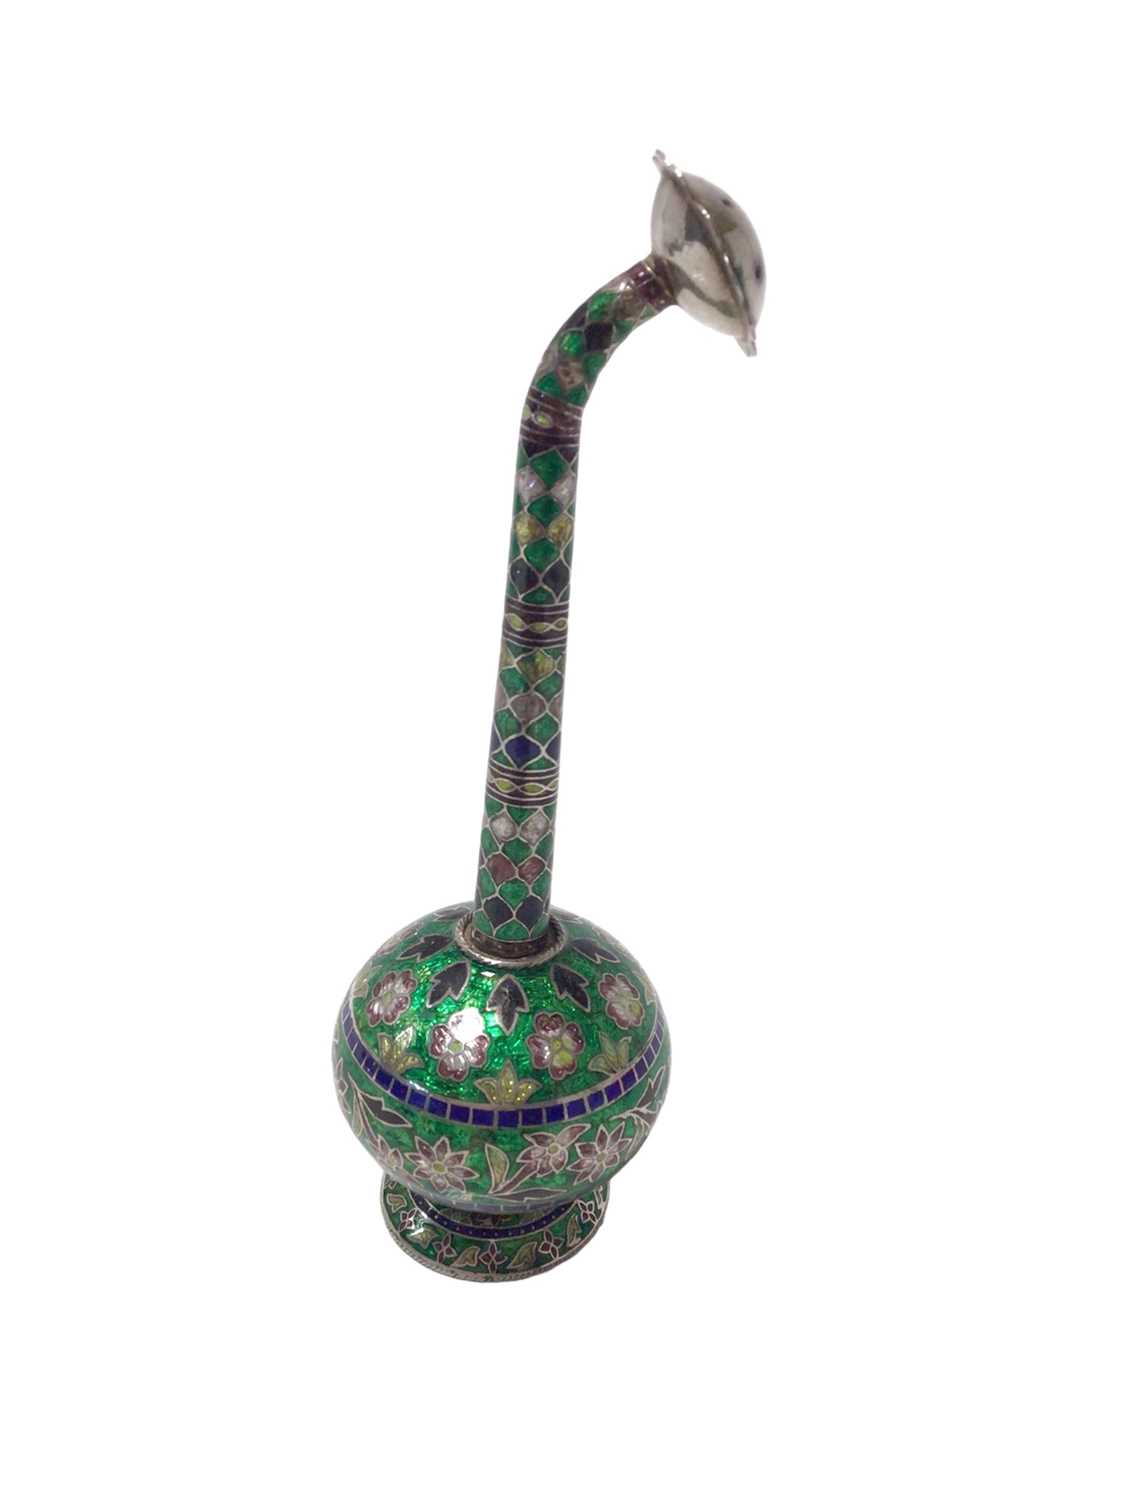 Middle Eastern silver and enamel rose water sprinkler, 17cm in overall height - Image 2 of 4